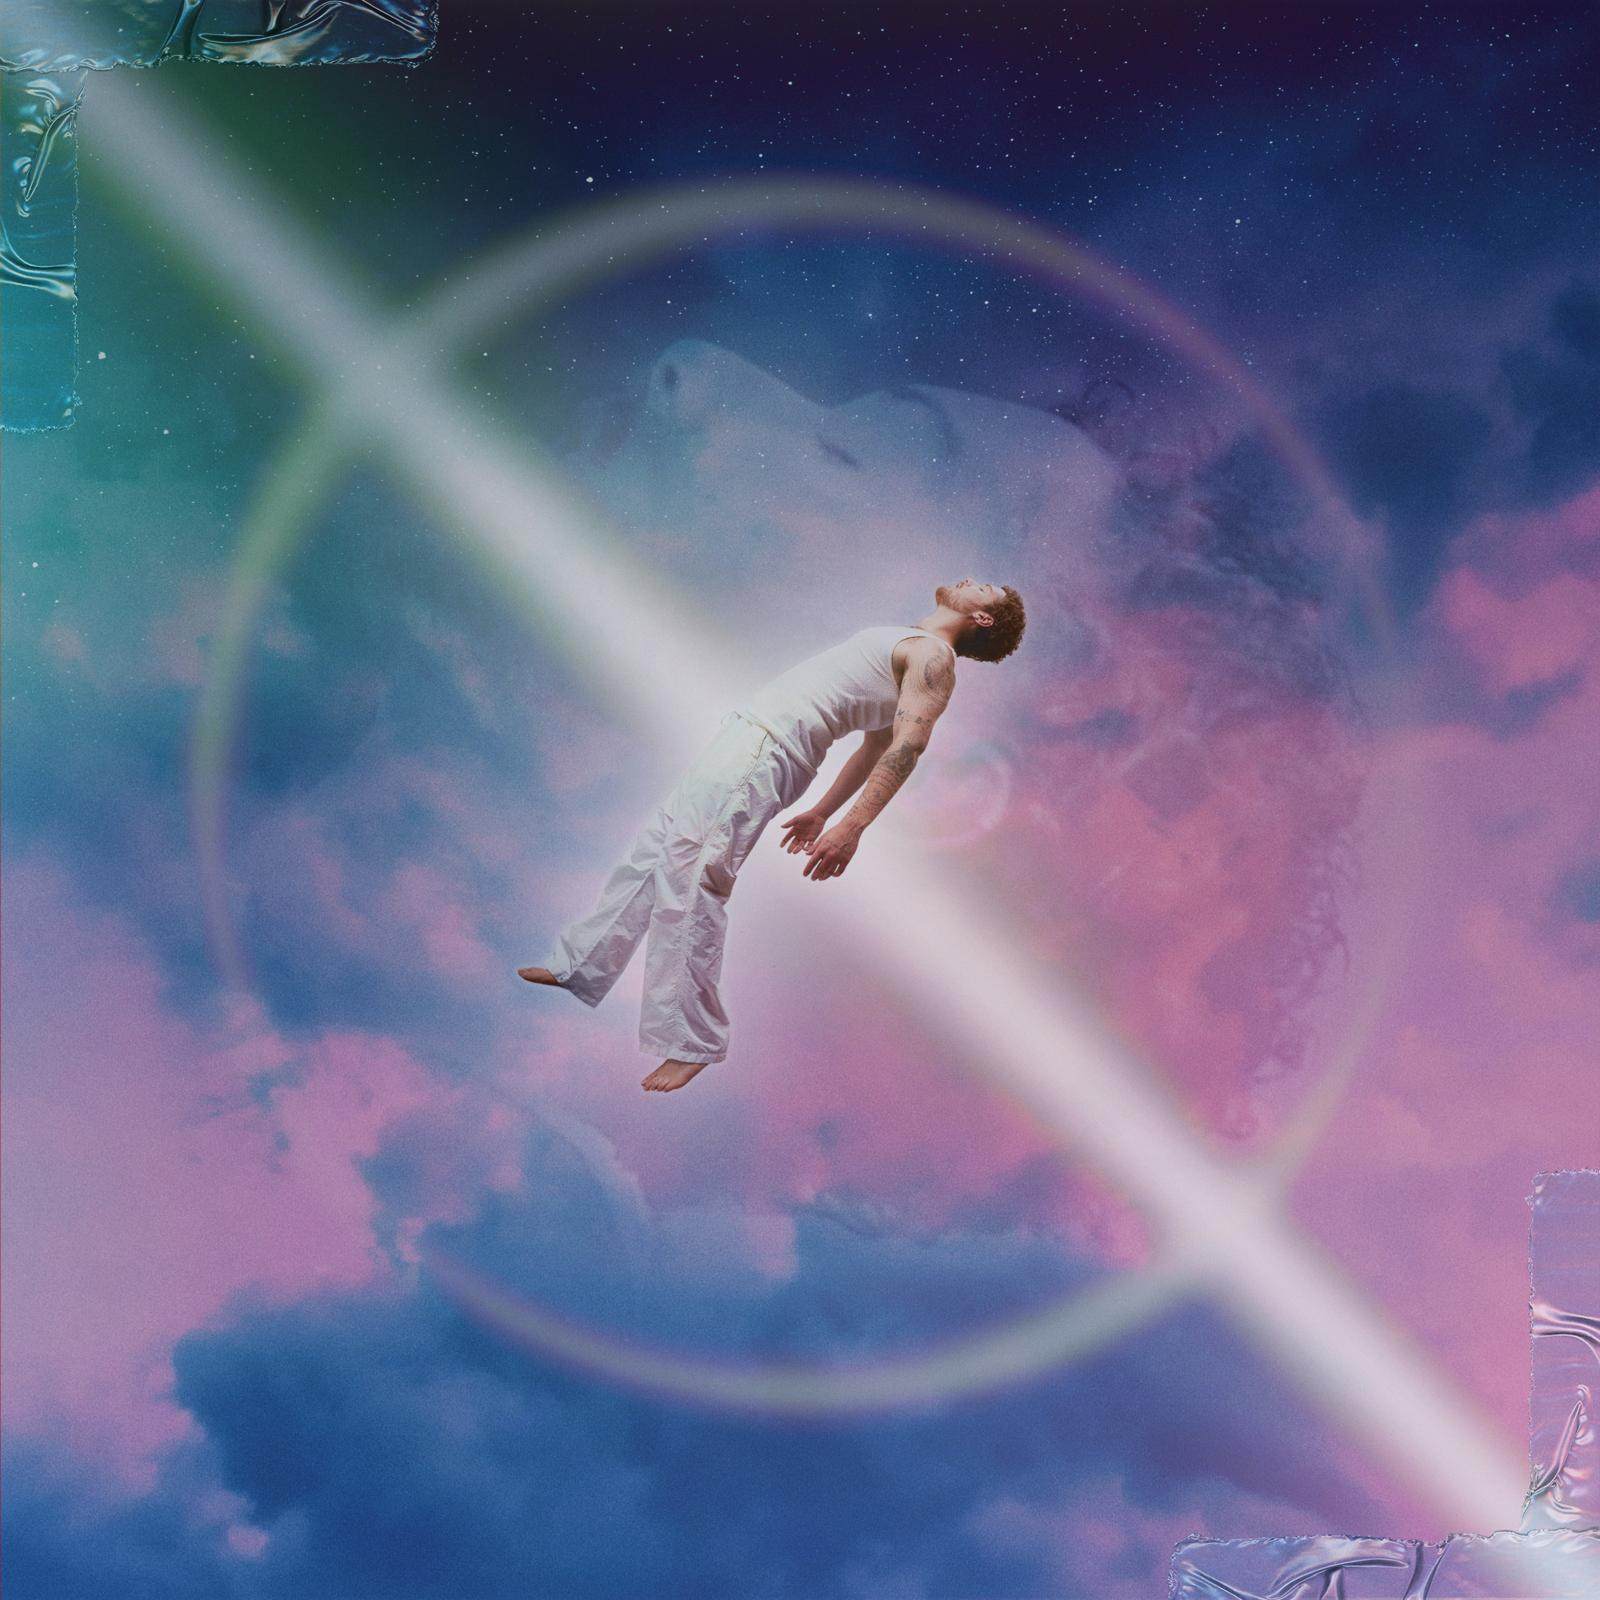 Bazzi says one of his favourite tracks on his new album is “Lost in the Simulation”. Photo: Warner Music